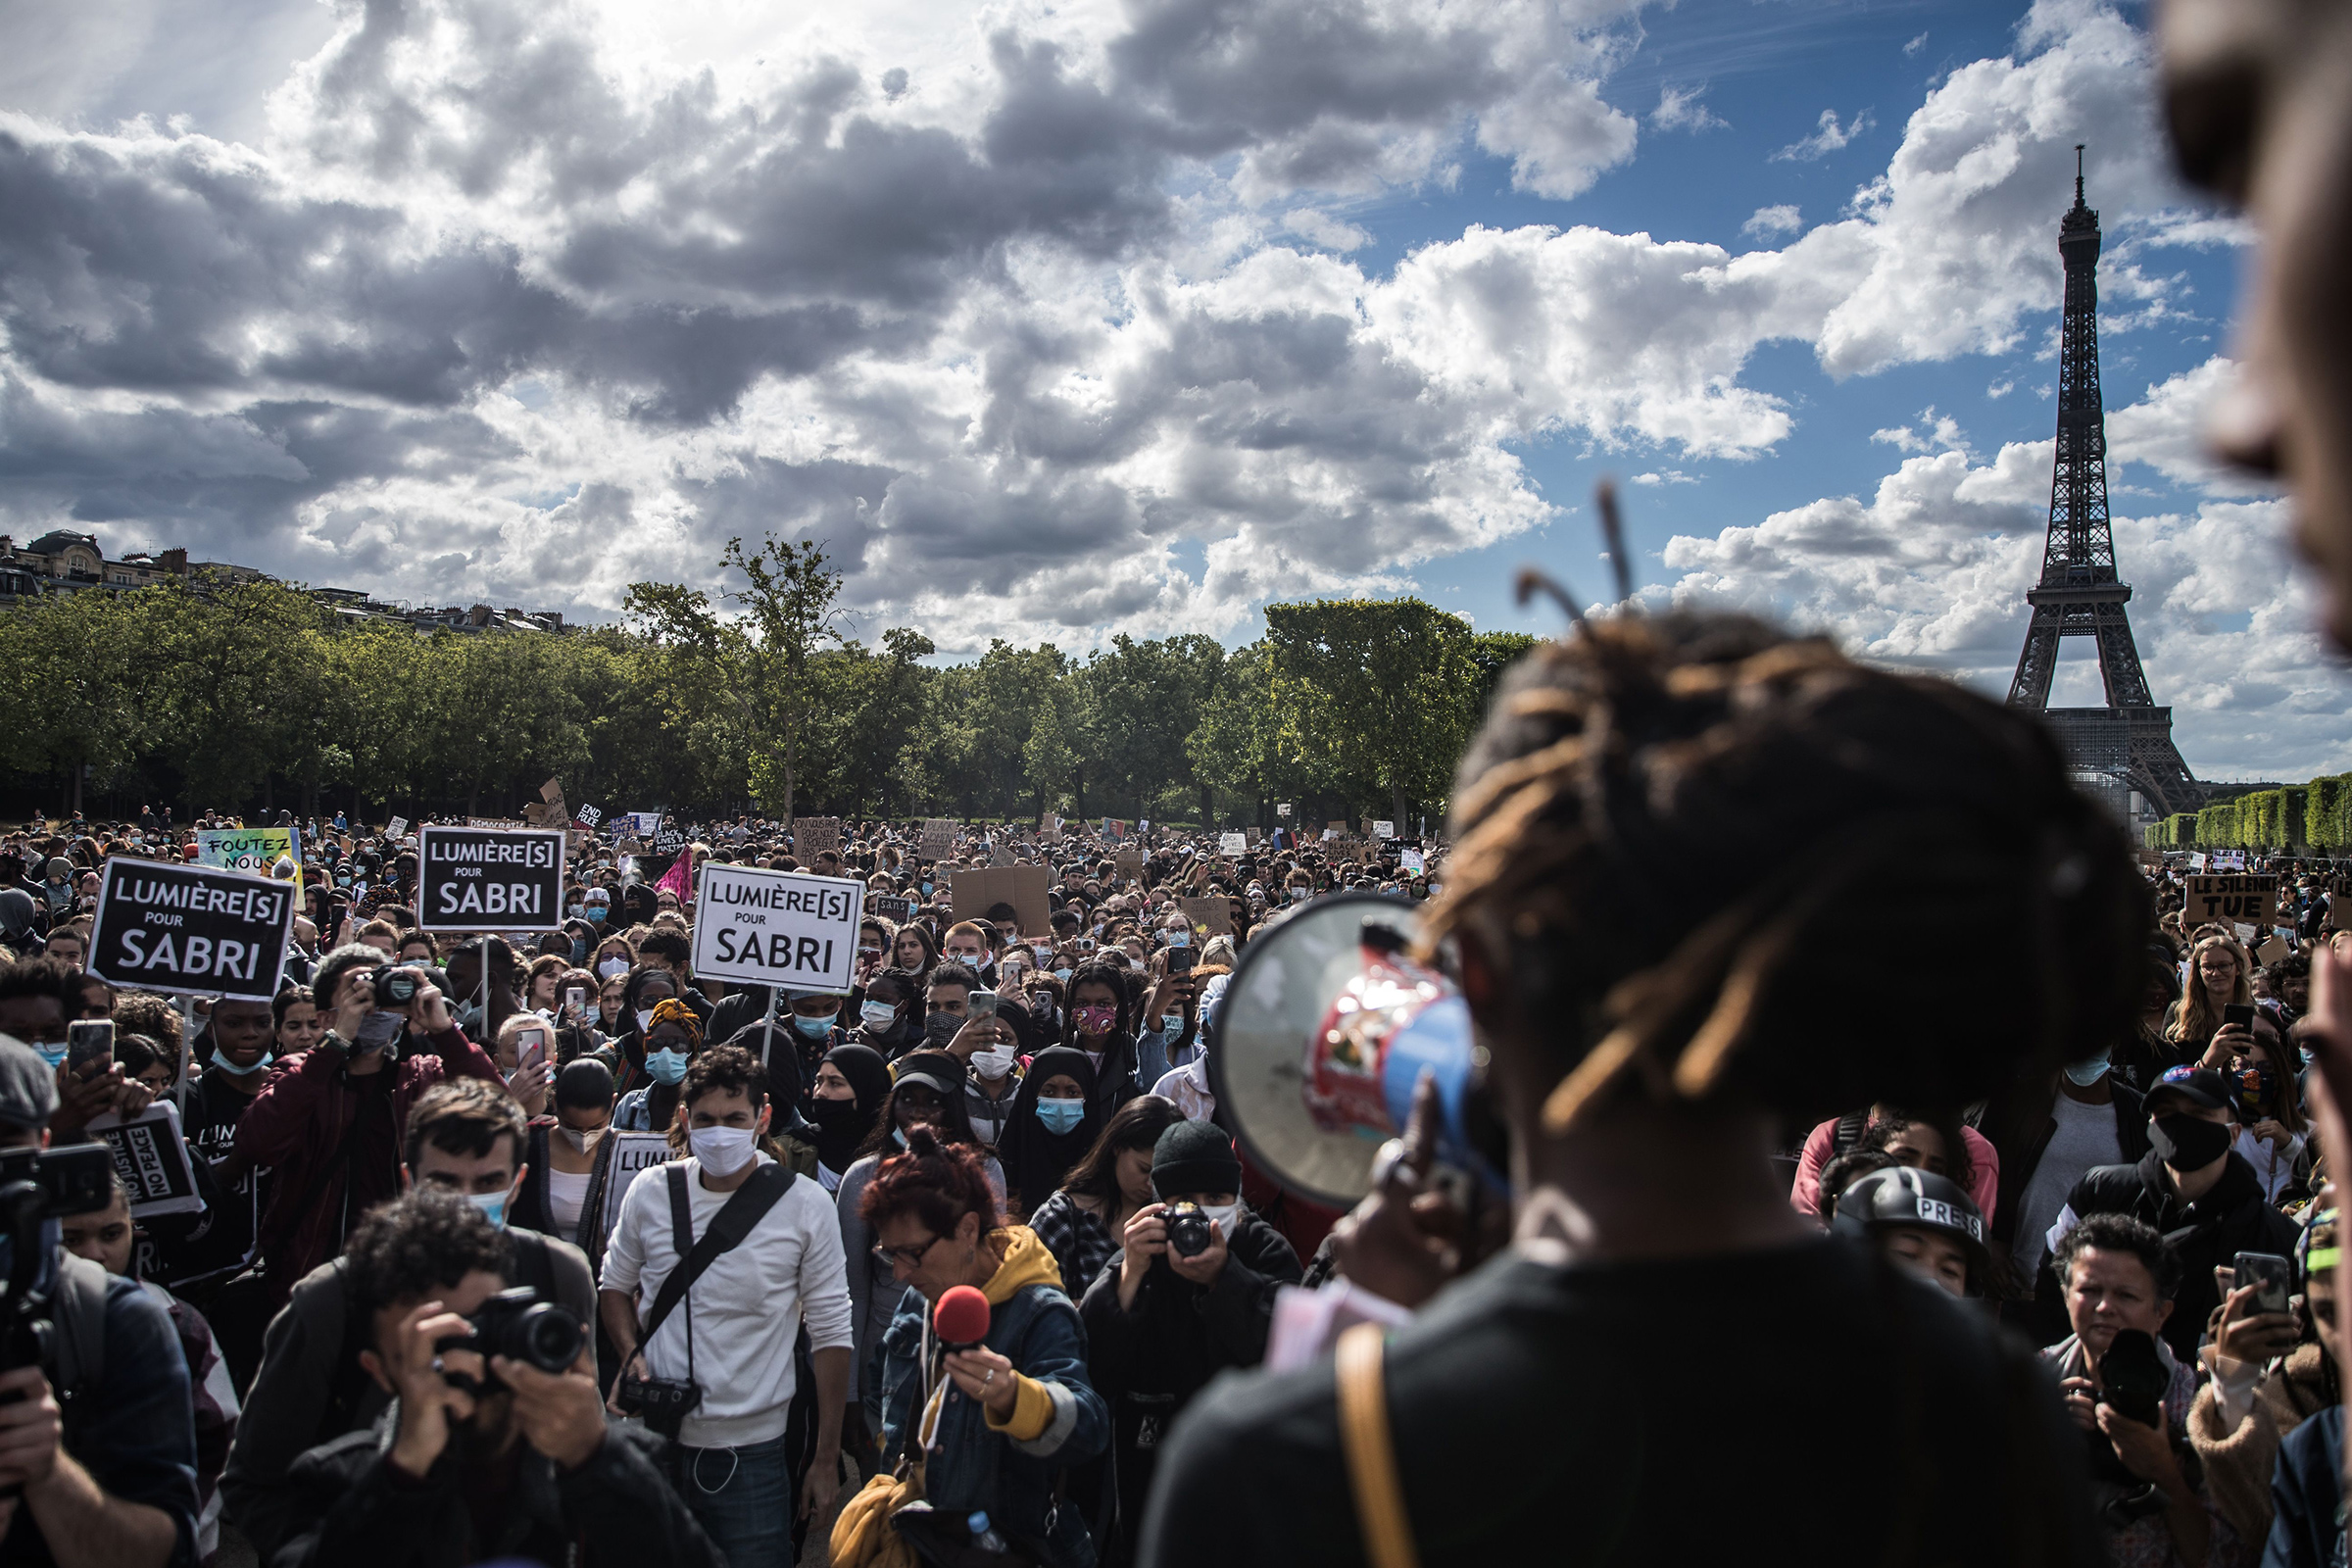 Protesters in Paris speak out on June 6 against police brutality in the U.S. and France (Mohammed Badra—EPA-EFE/Shutterstock)